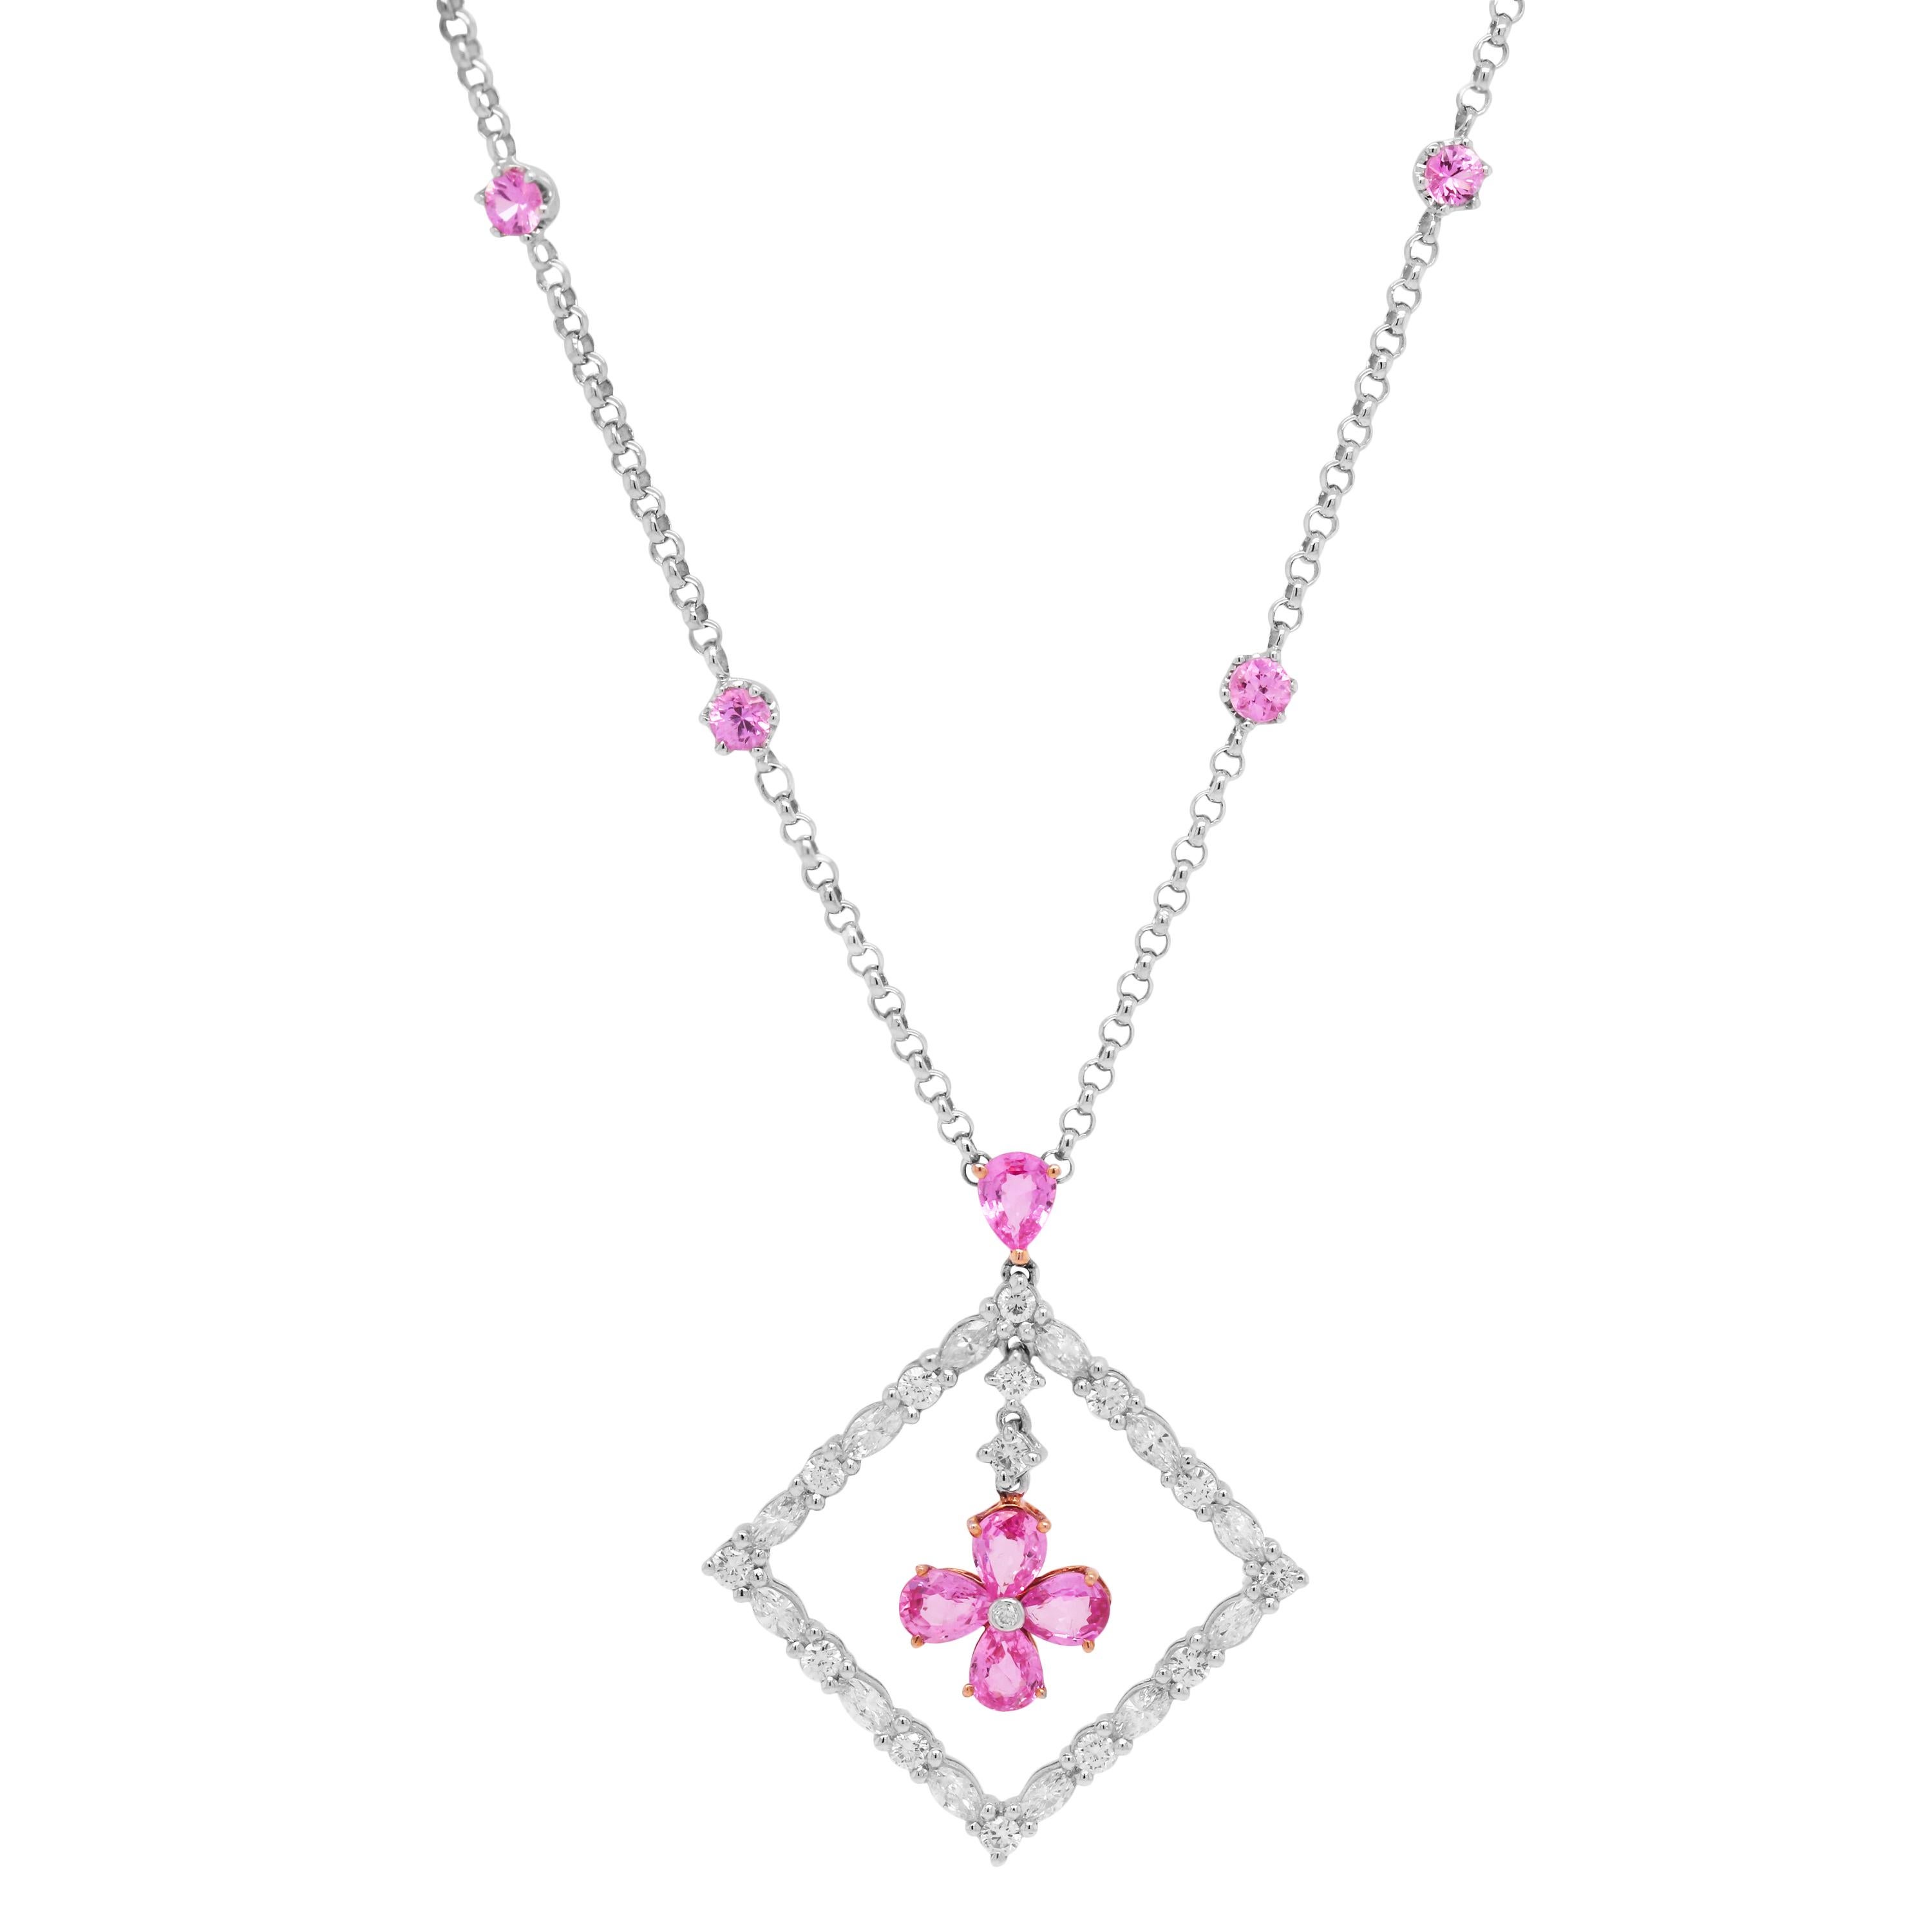 Contemporary White Gold and Diamond Square Pendant Necklace with Pink Sapphires For Sale